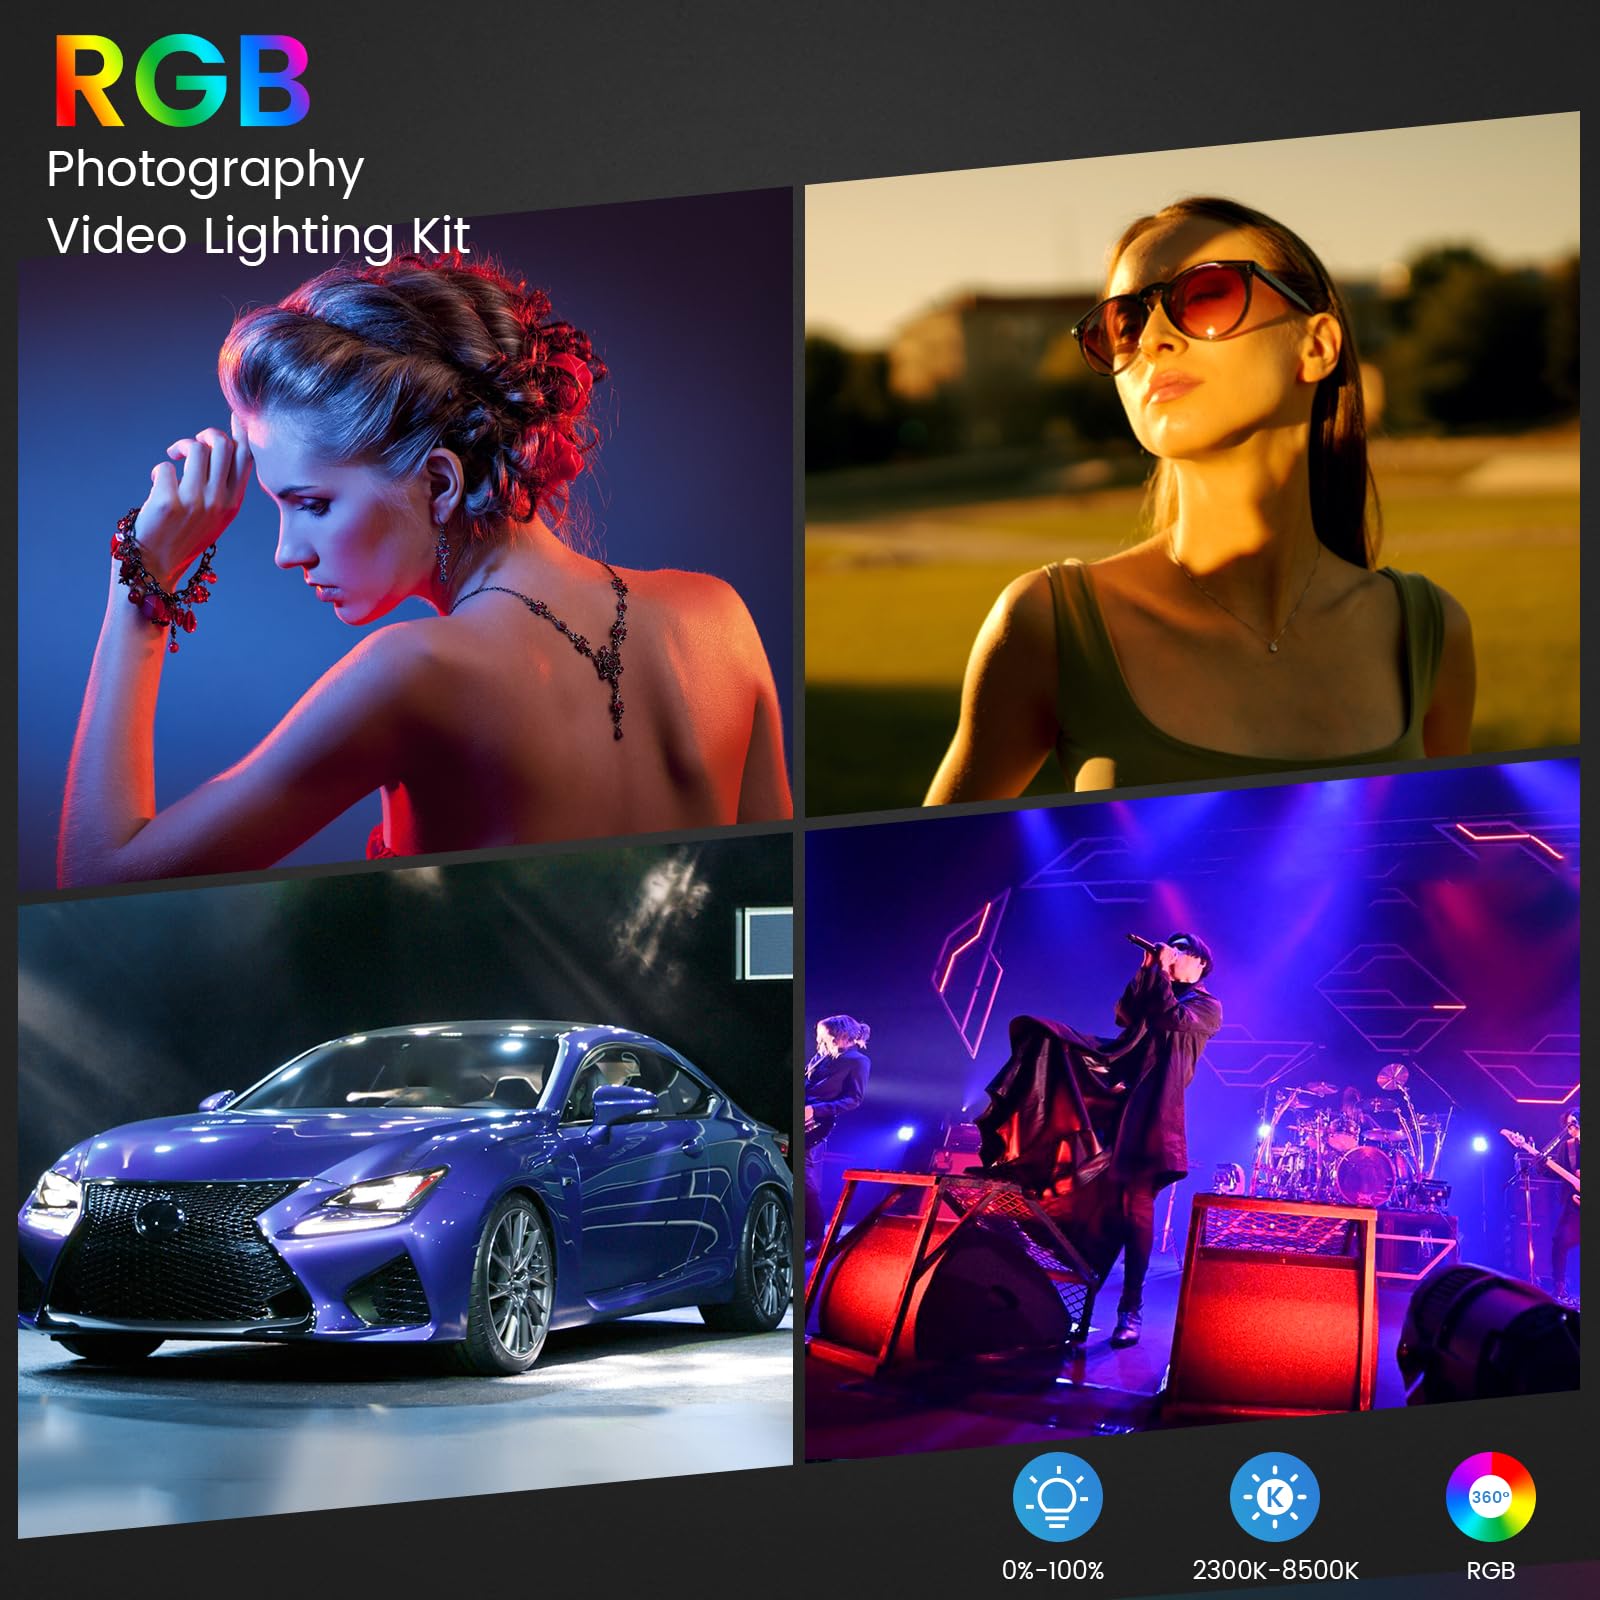 RGB Photography Video Lighting Kit, 50W Bi-Color Energy-Saving LED Video Studio Lights with 2300k~8500k Dimmable CRI 97+ for Filming Camera Photo Recording Stage Shooting Streaming YouTube TikTok